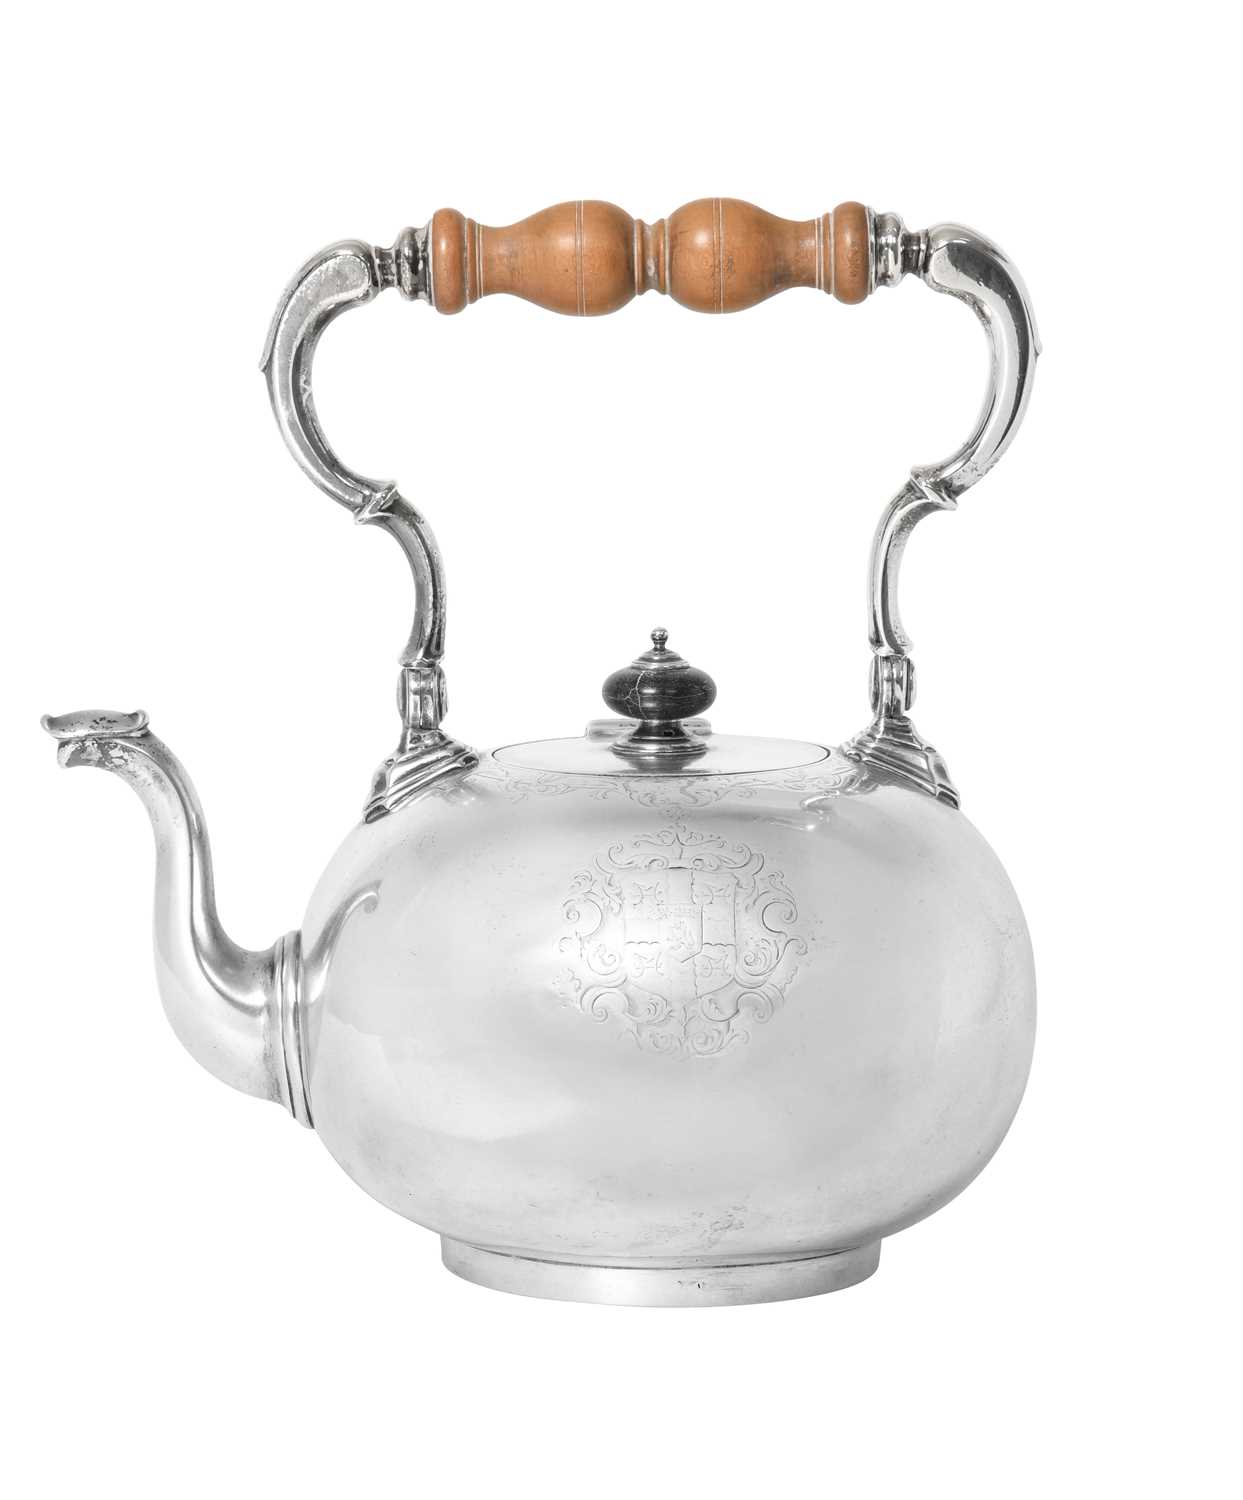 A George II Silver Kettle, Stand and Lamp, by Matthew Cooper, London, 1726 - Image 2 of 11